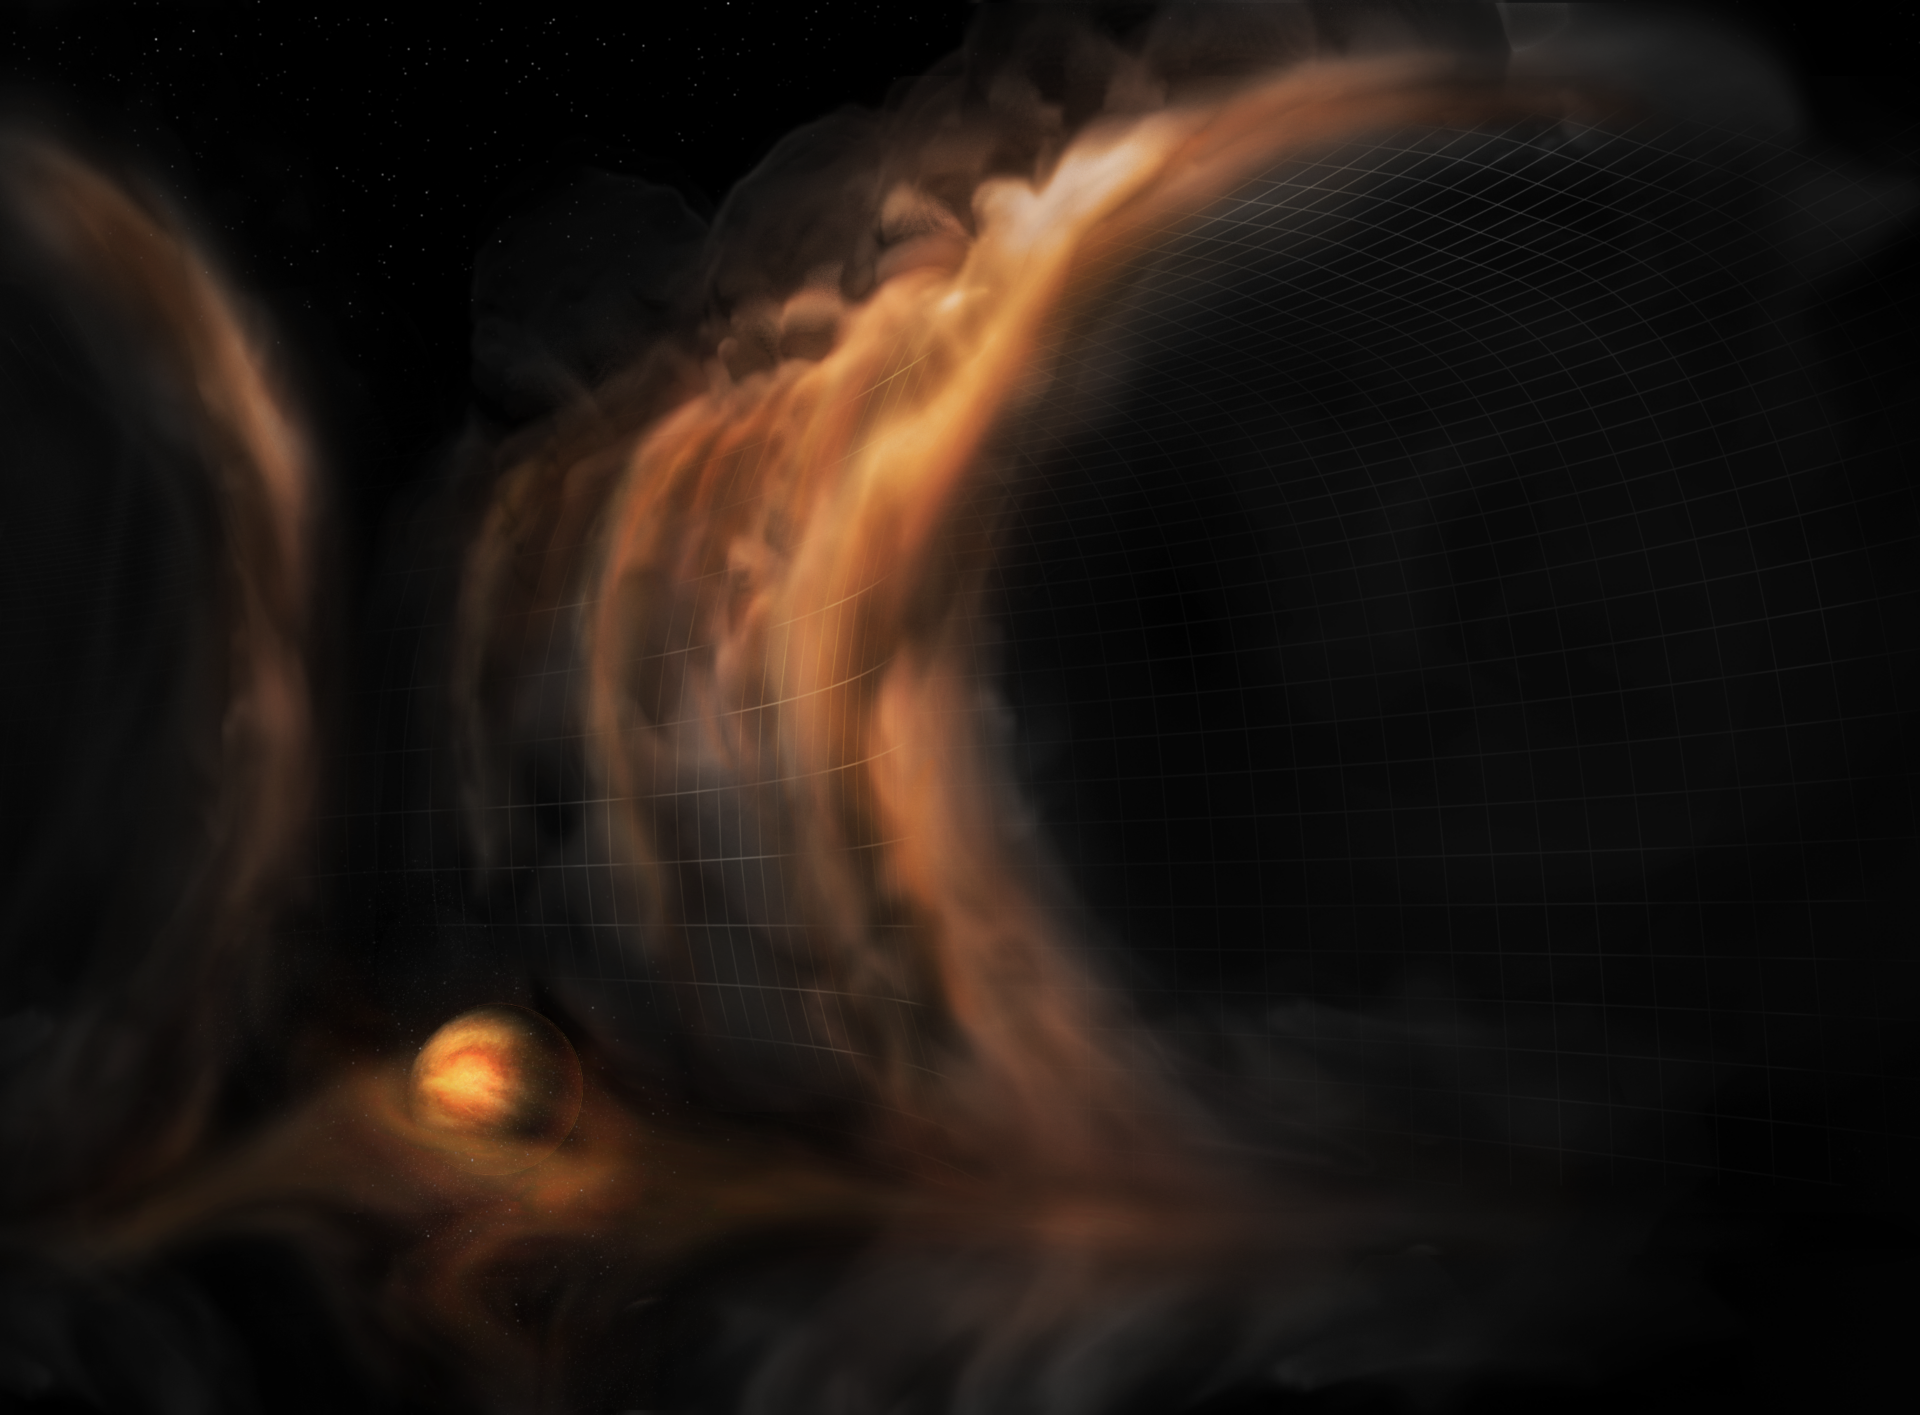 <p>Artist’s impression of gas flowing like a waterfall into a protoplanetary disk gap, which is most likely caused by an infant planet. Credit: NRAO/AUI/NSF, S. Dagnello.</p>
